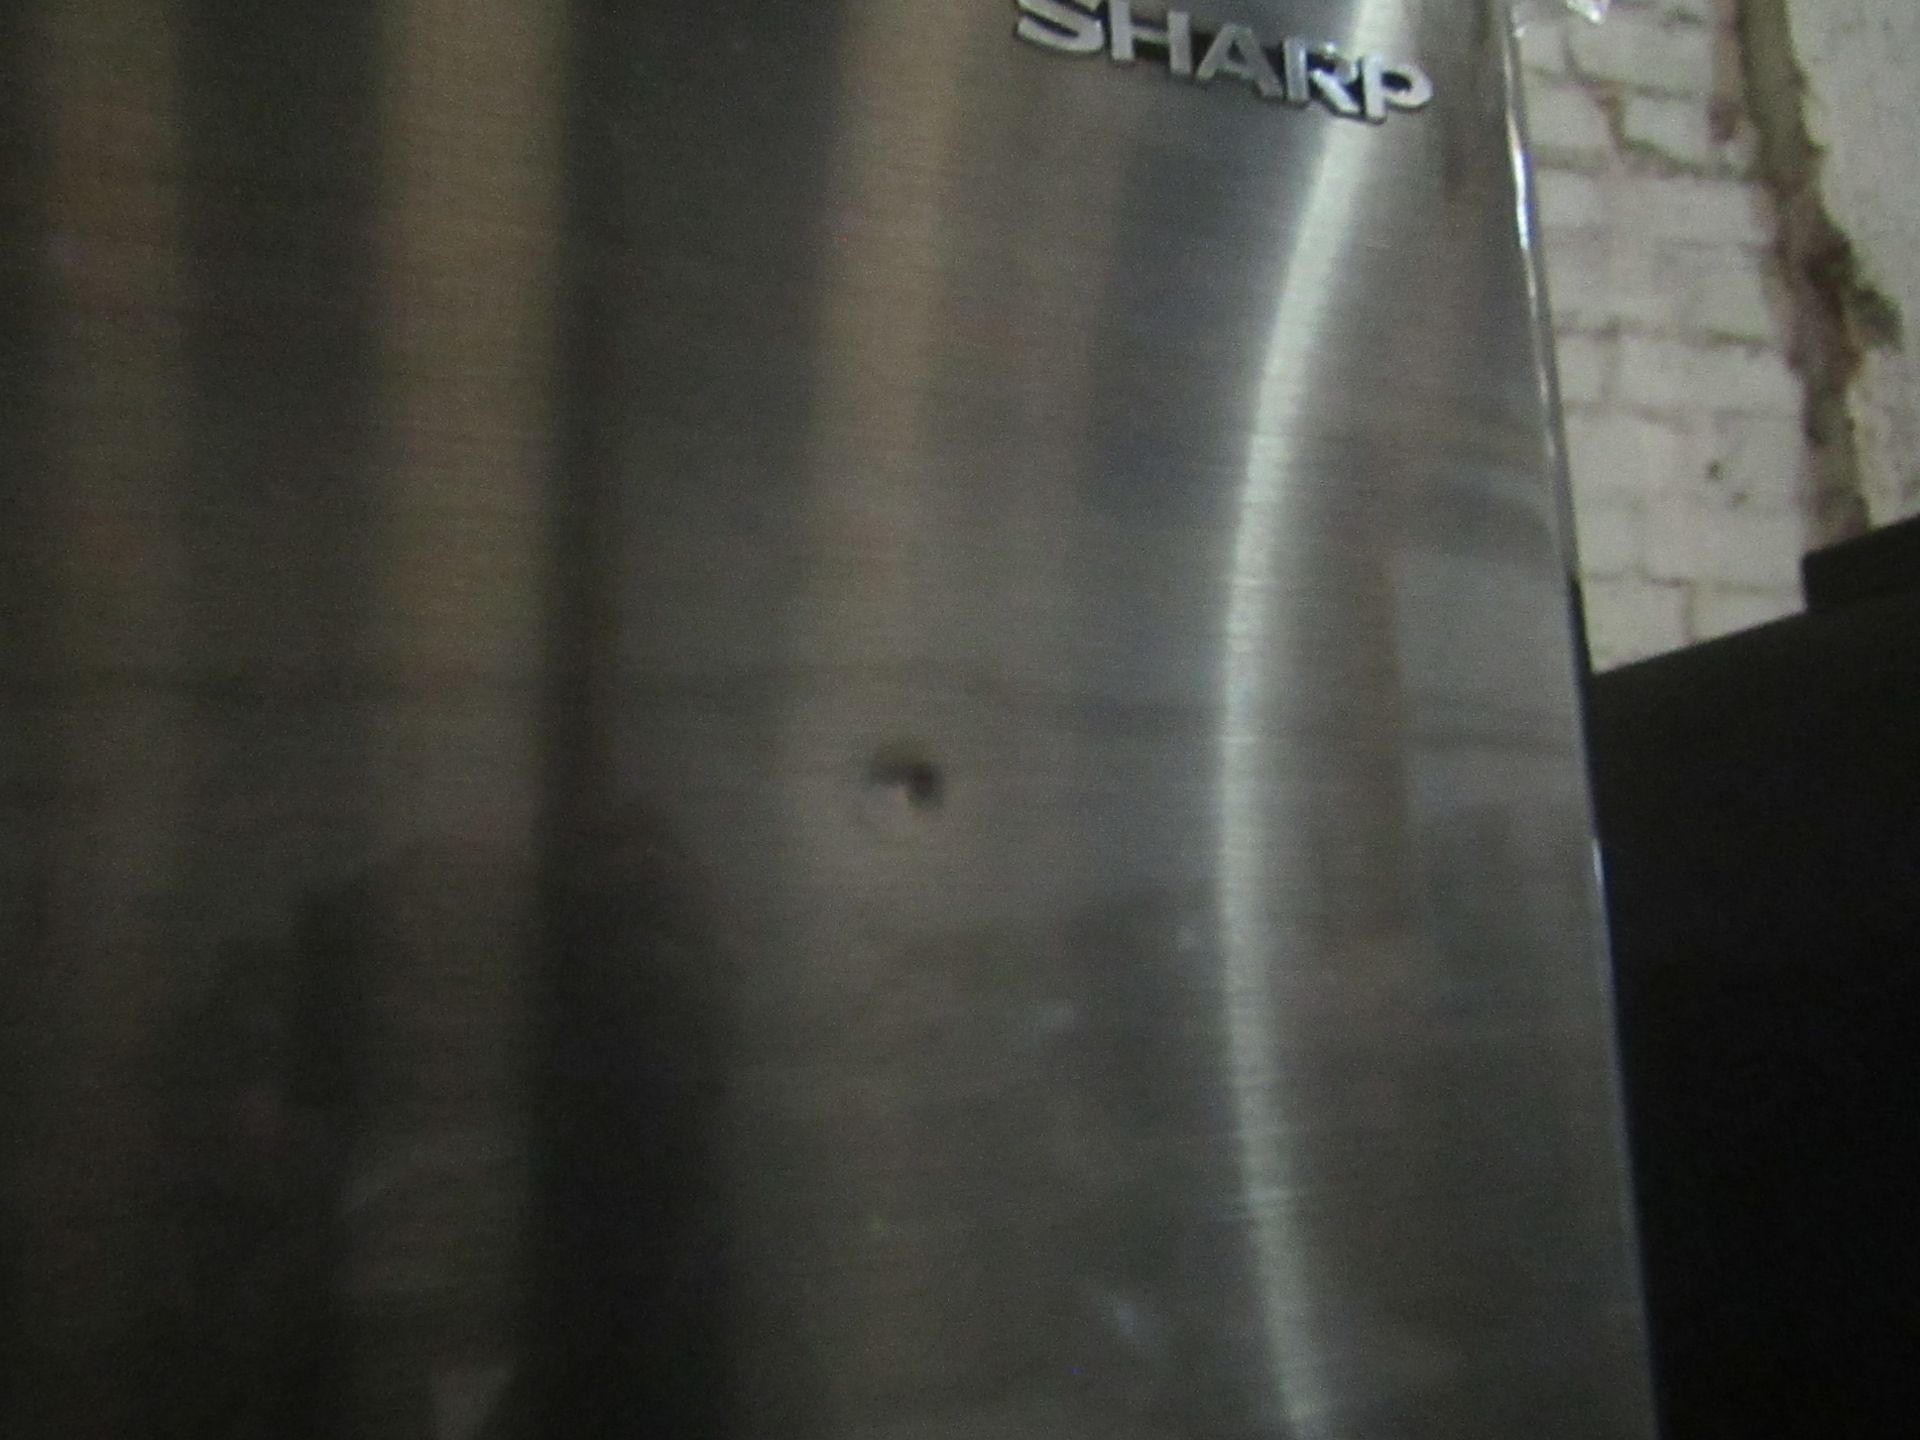 Sharp 4 door american fridge freezer, getting cold in both compartments when plugged in, has a - Image 2 of 4